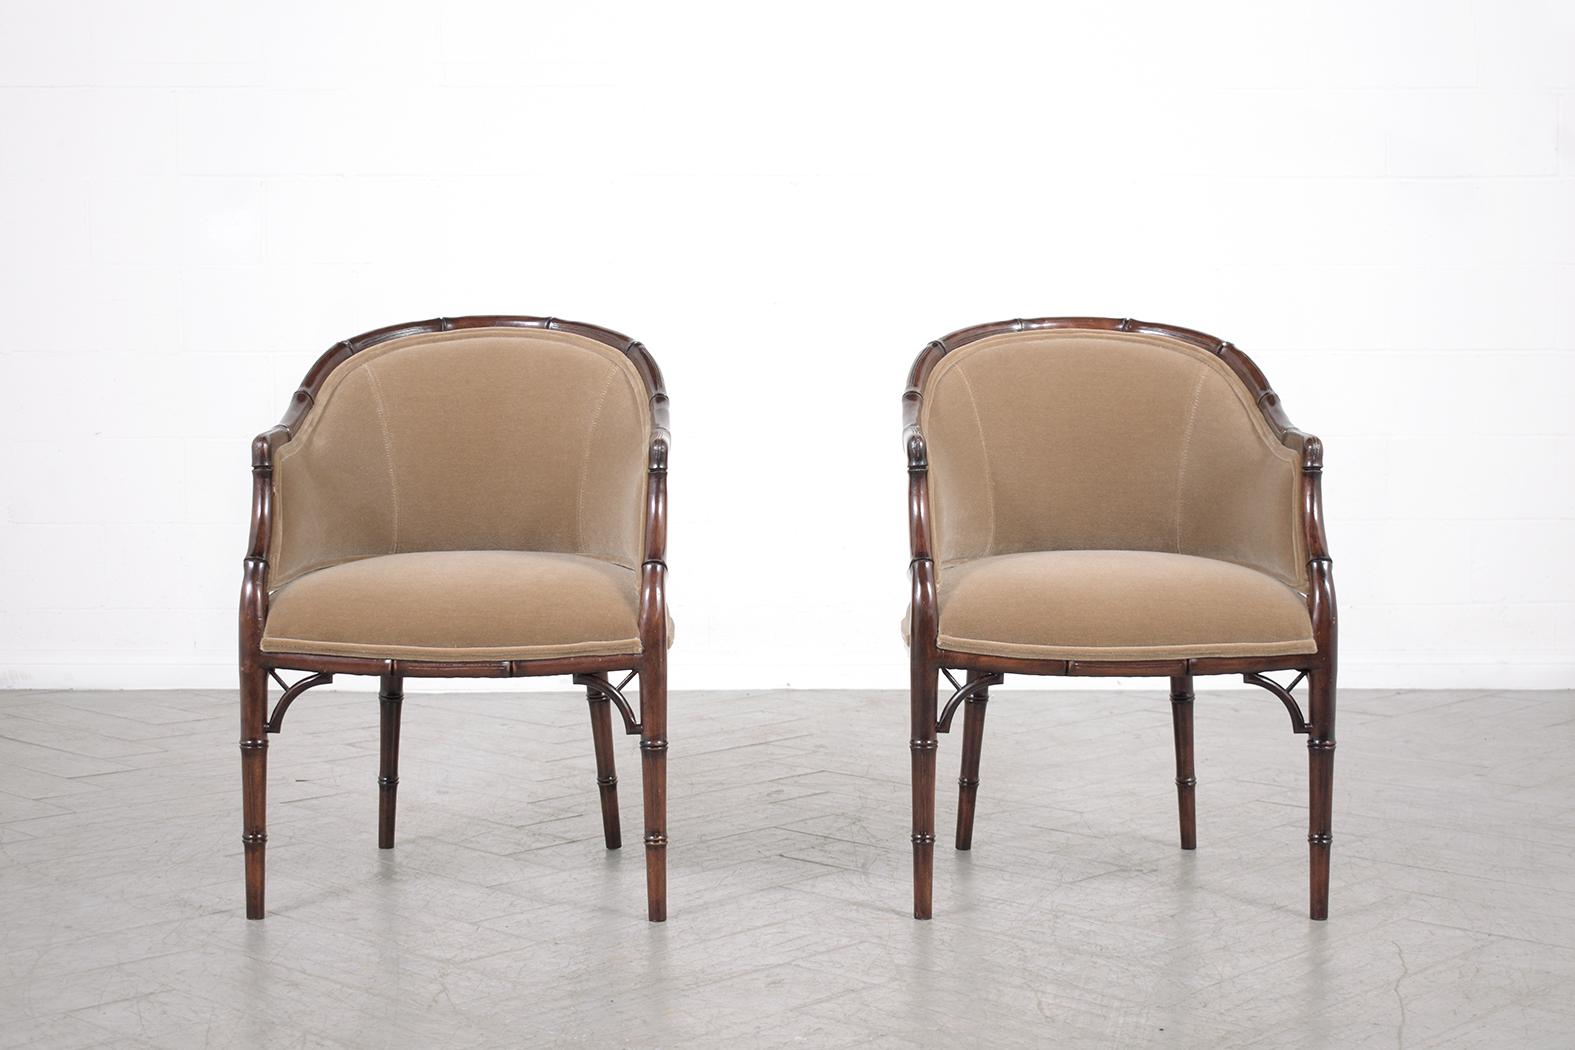 Dive deep into vintage luxury with our remarkable pair of Hollywood Regency armchairs, brilliantly echoing the glamour and opulence of the golden age of Hollywood. Meticulously hand-crafted out of solid wood, these chairs have not only stood the